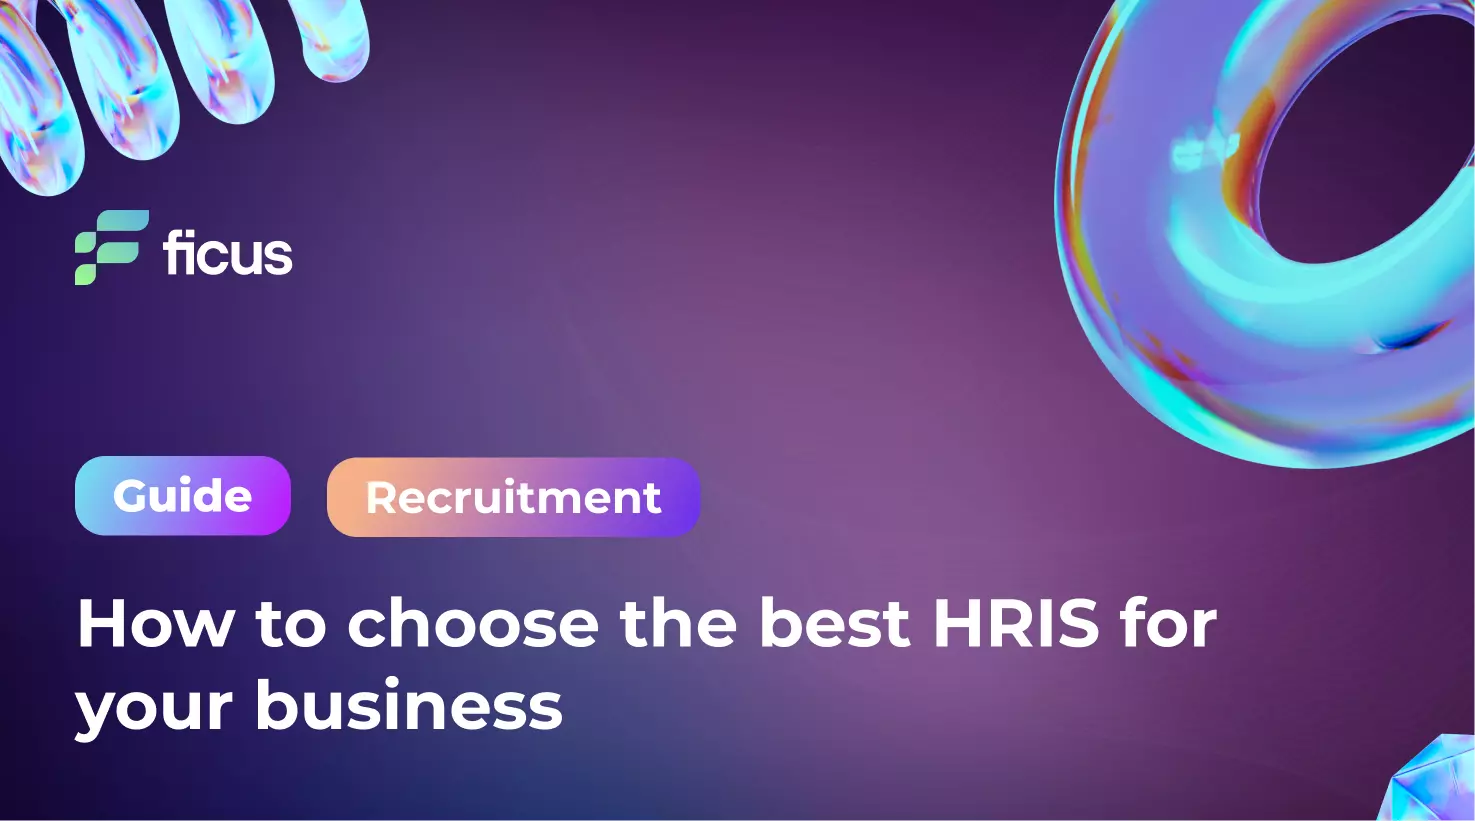 11_How to choose the best HRIS for your business